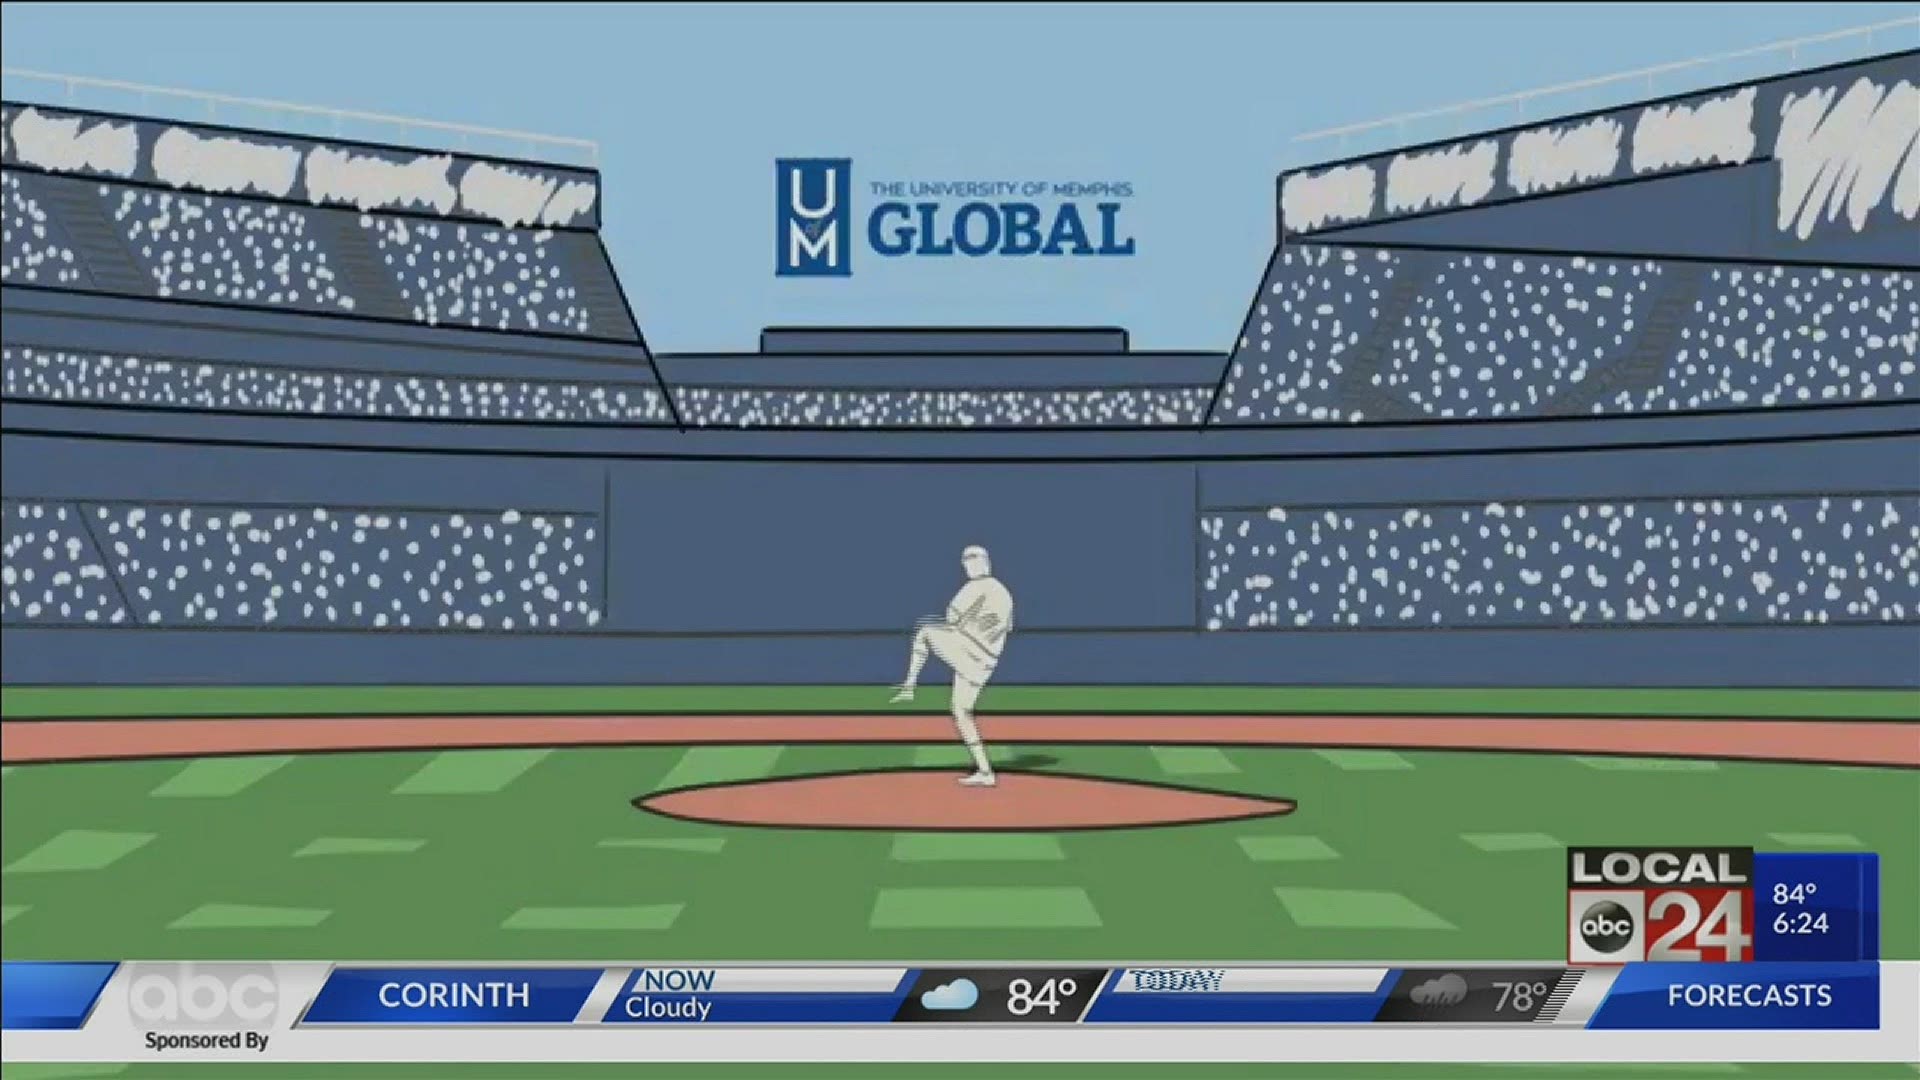 UofM Global offers complimentary online course on baseball localmemphis